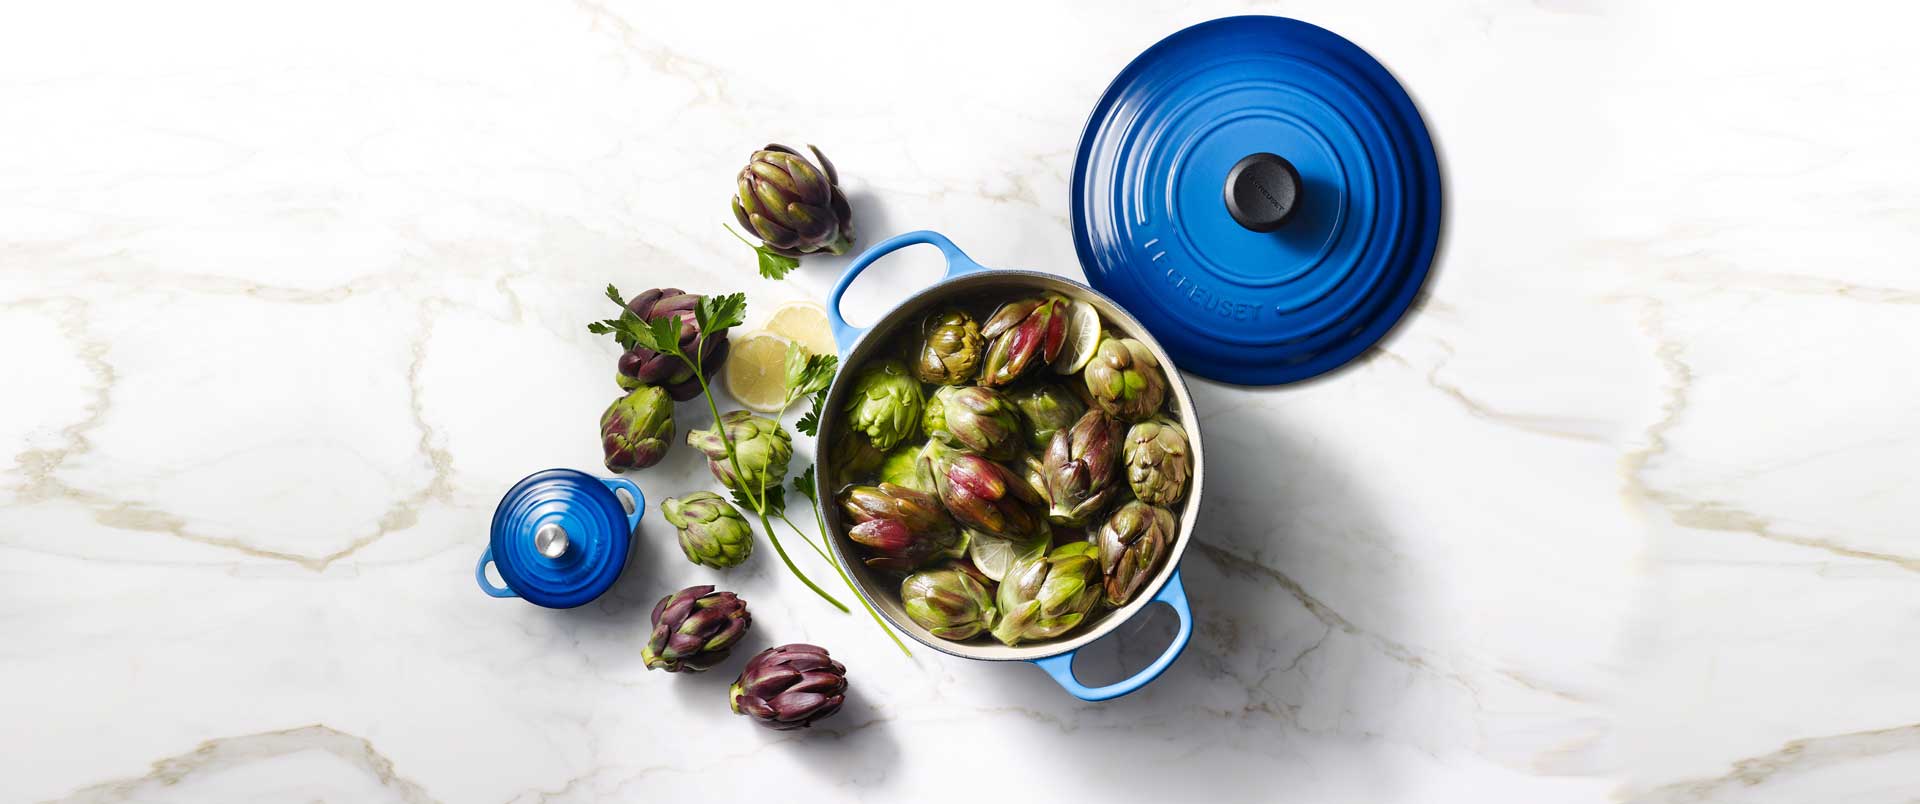 Le Creuset French Oven | Kitchen Smart